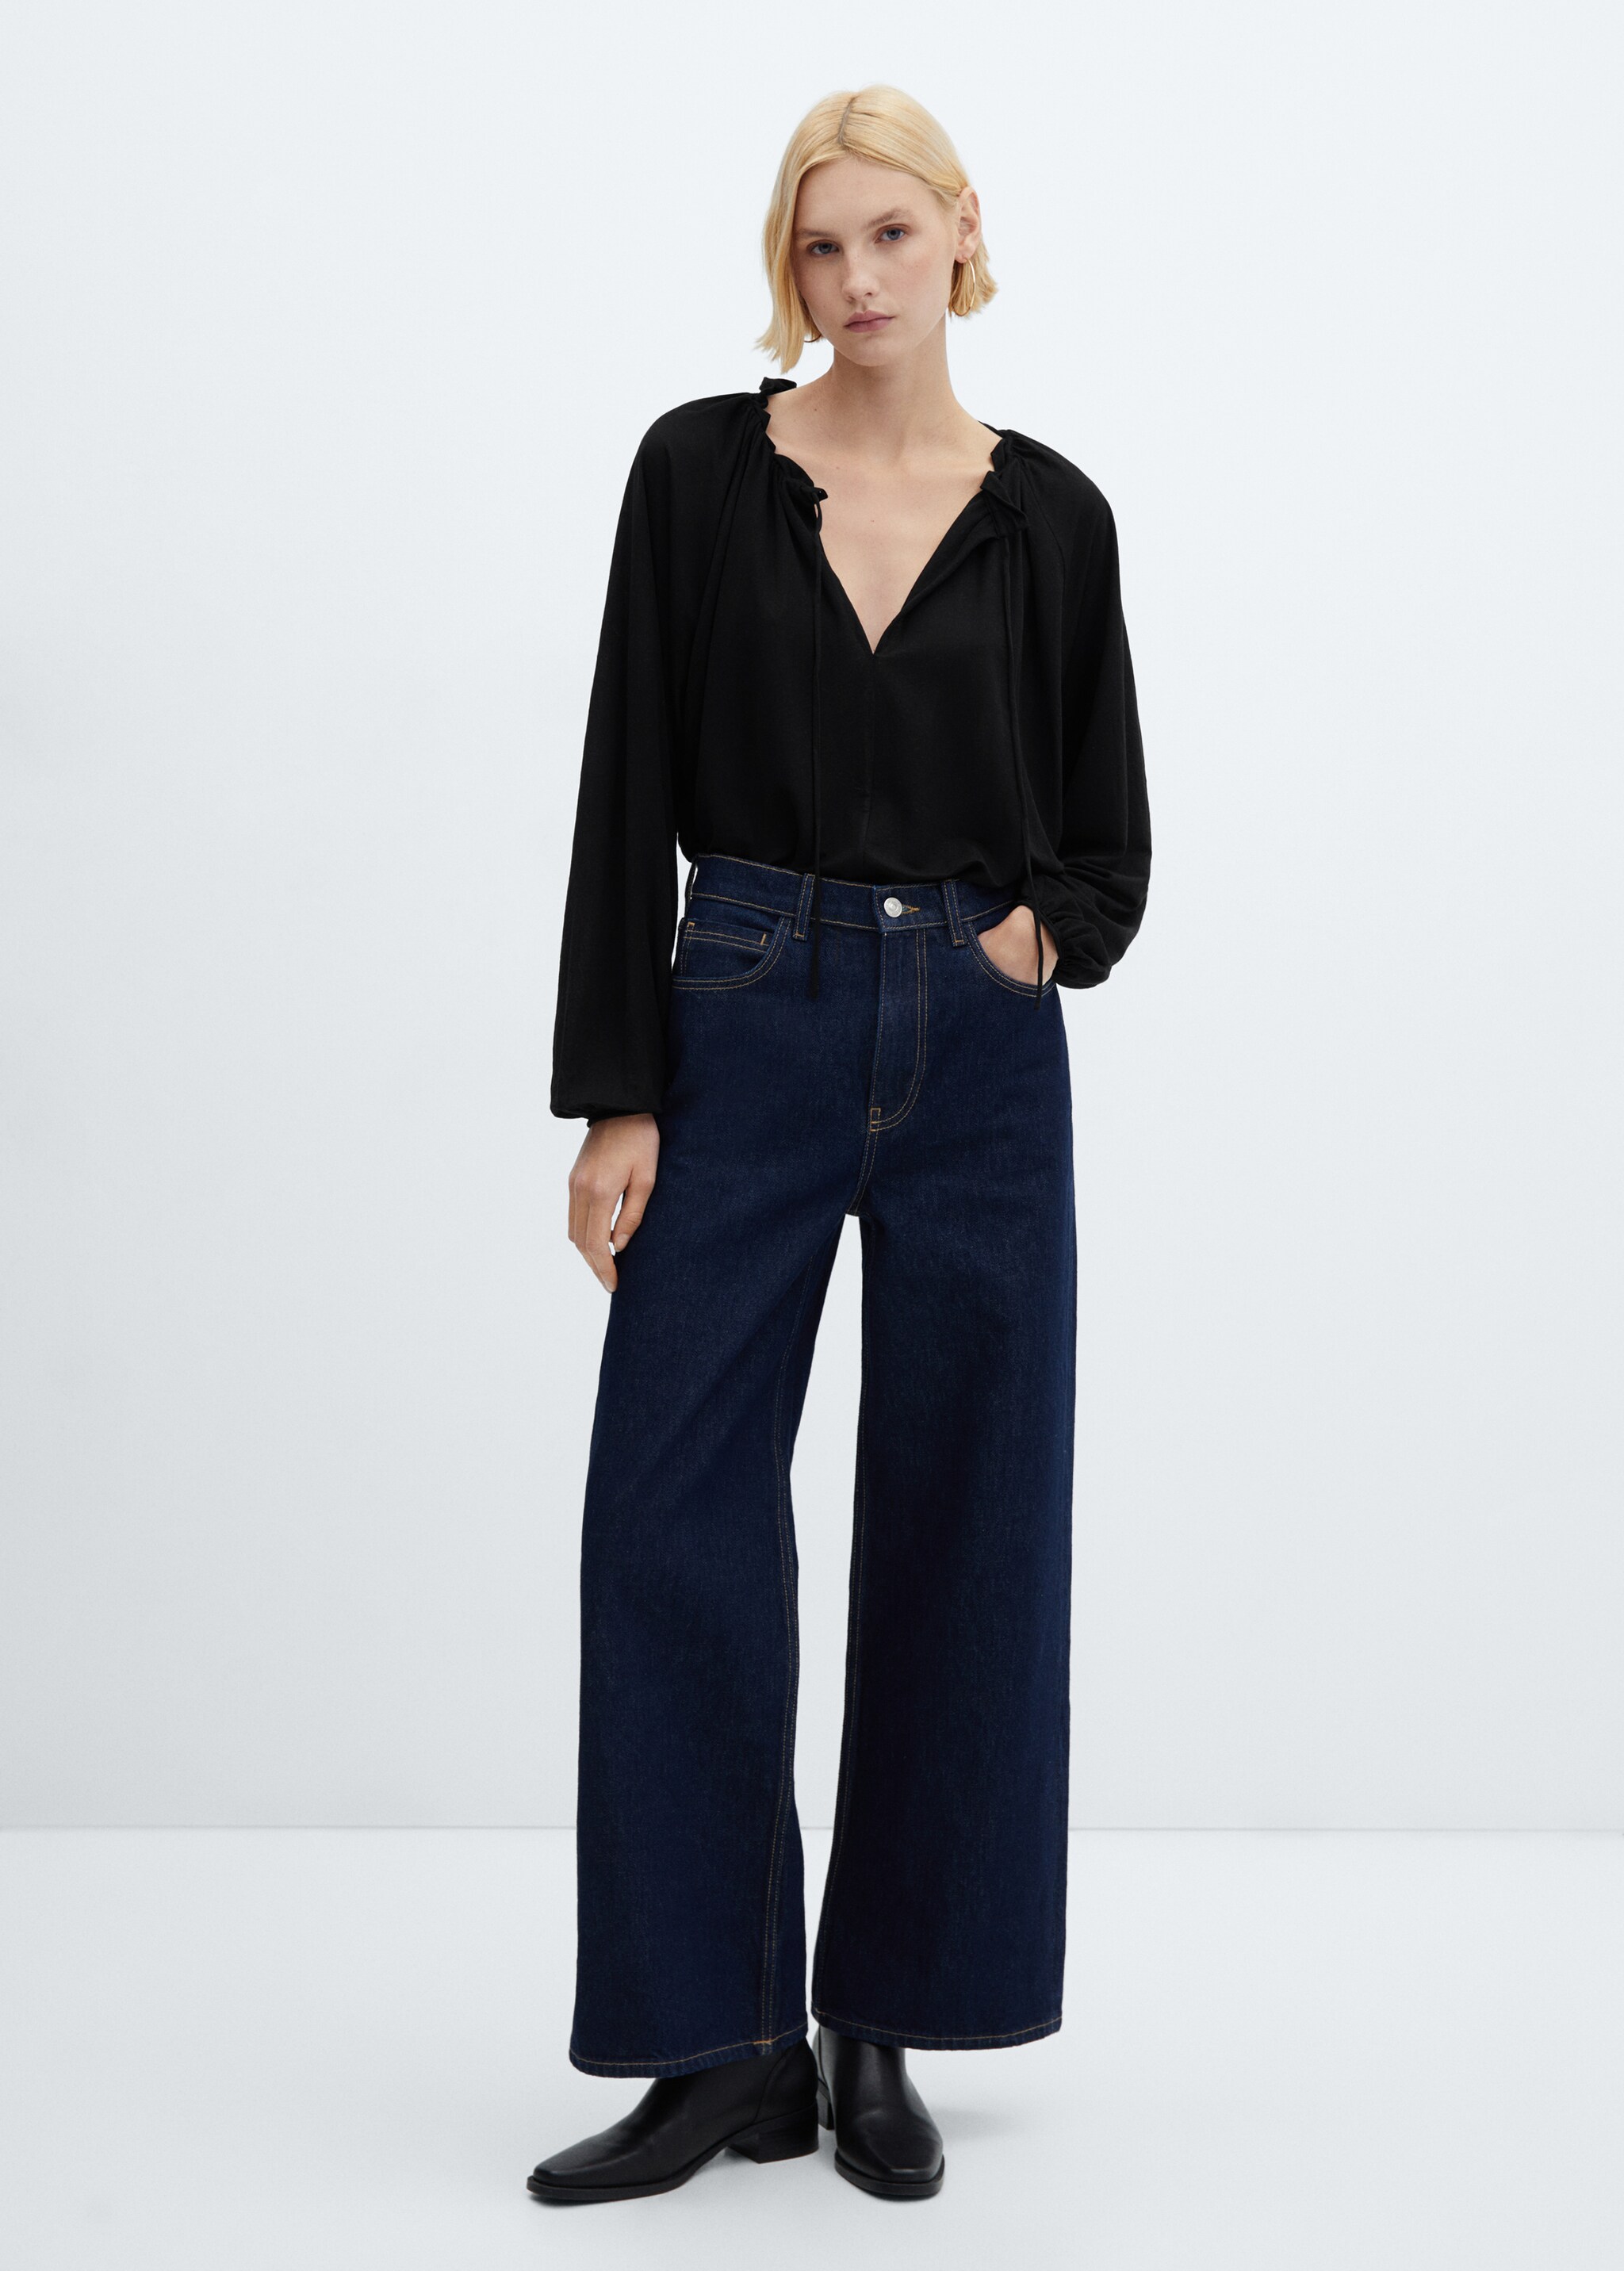 Puffed sleeves blouse - General plane